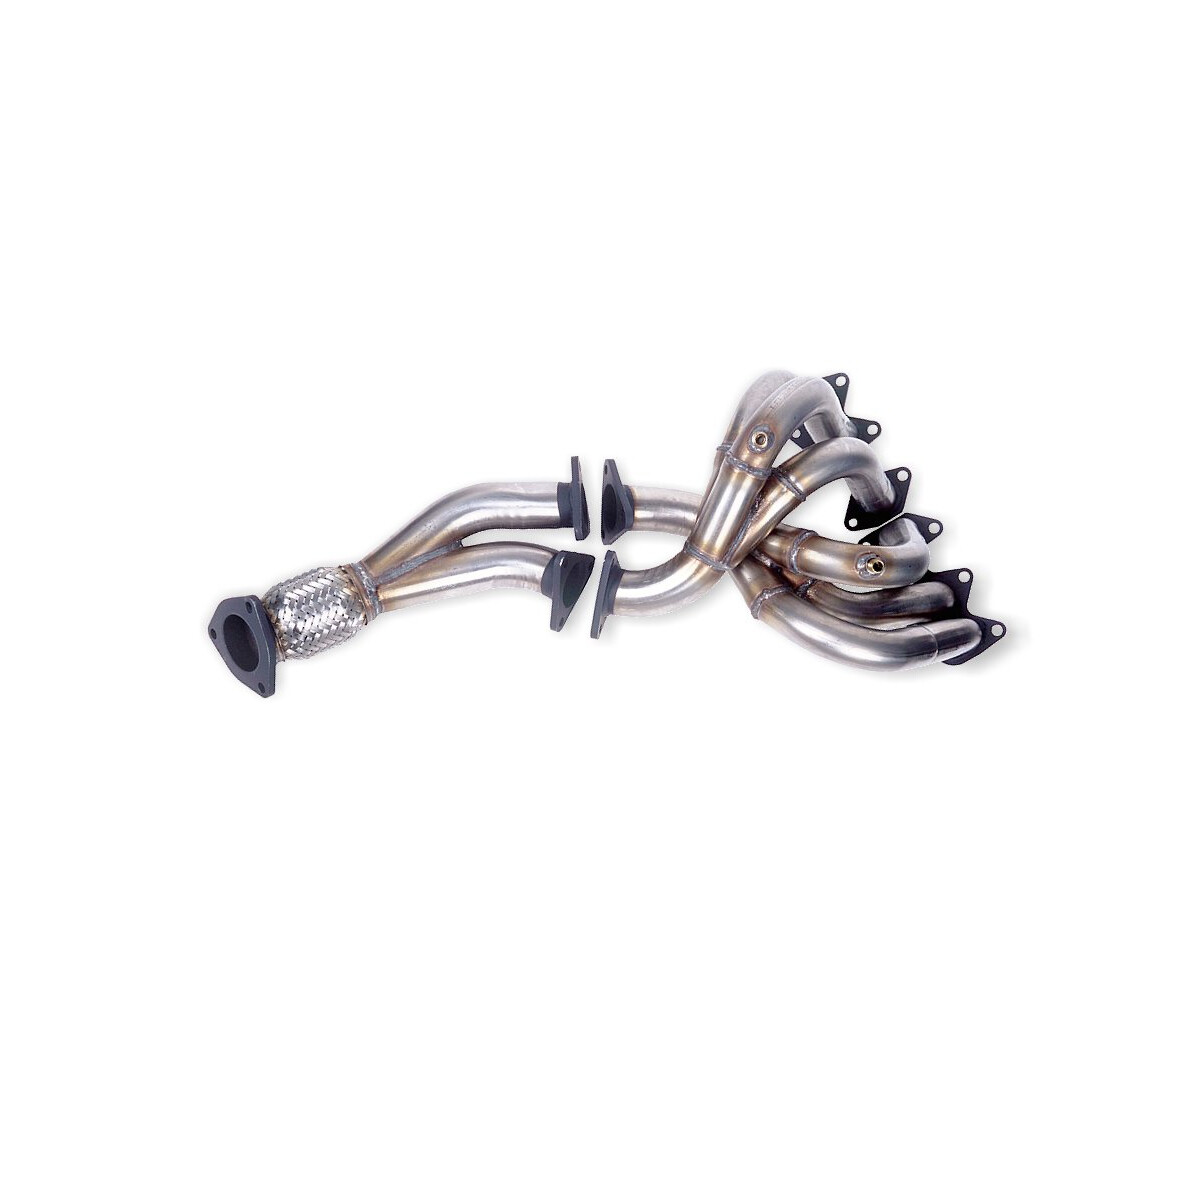 TeZet stainless steel exhaust header for A3...